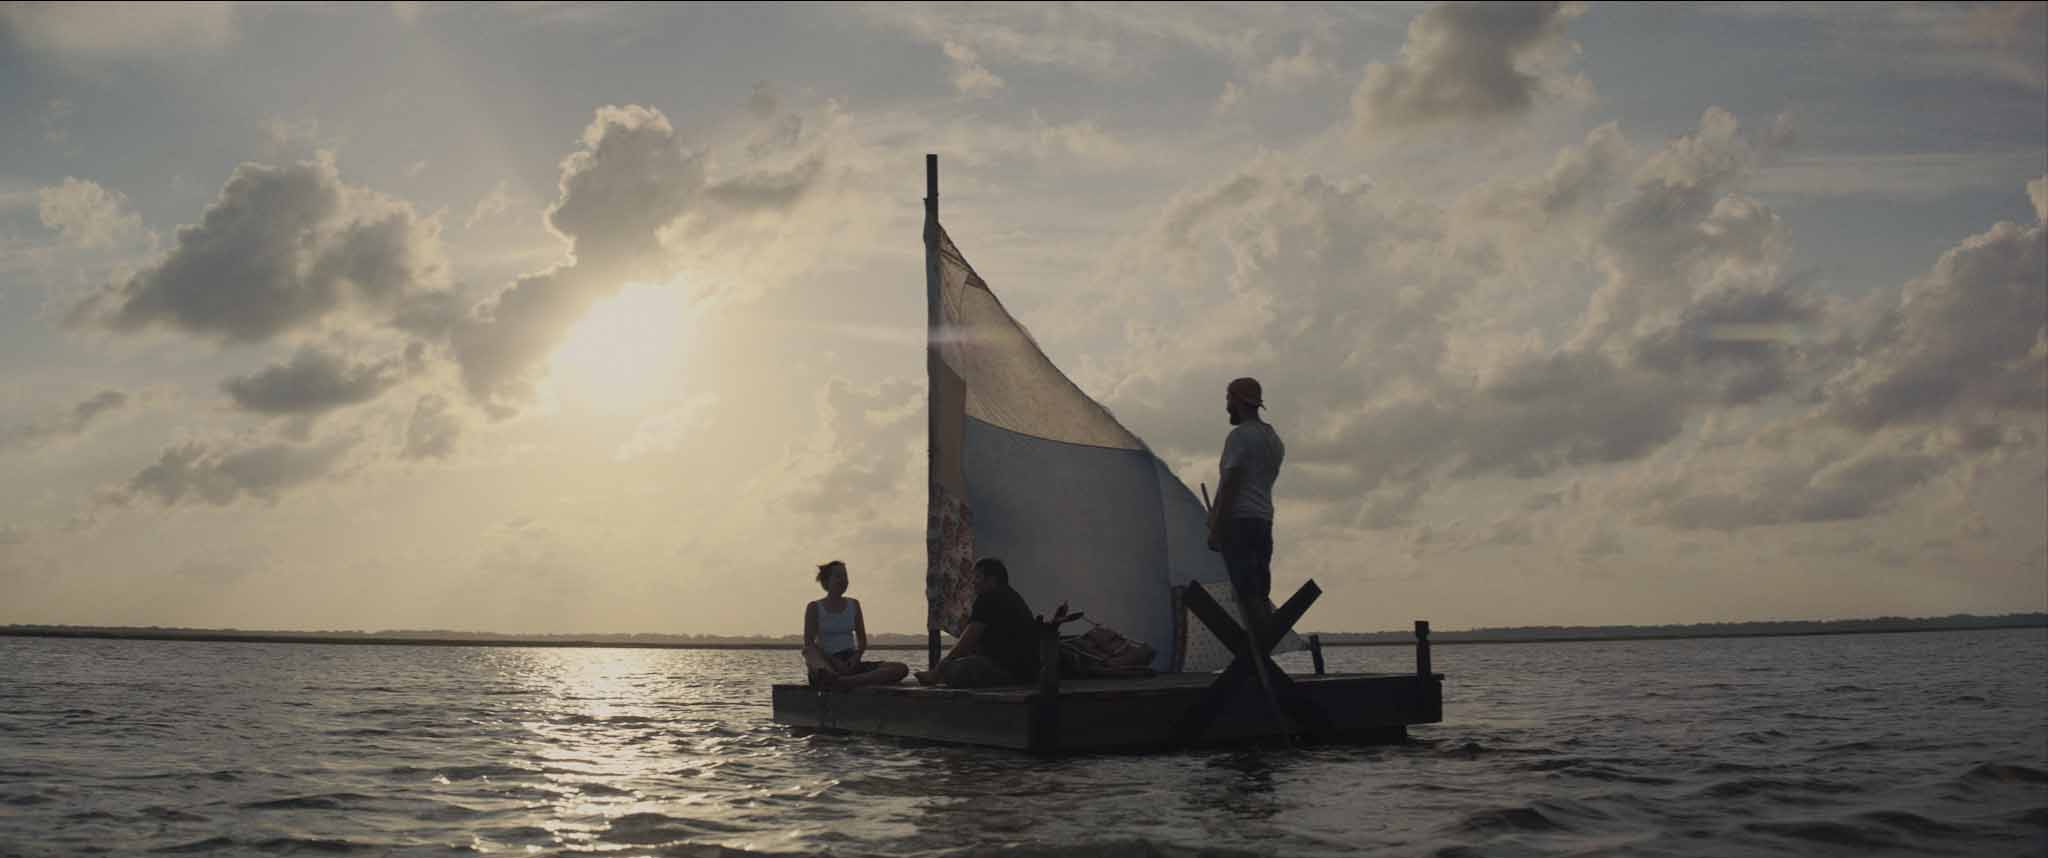 “The Peanut Butter Falcon” is a sweet portrayal of love, family, and ability